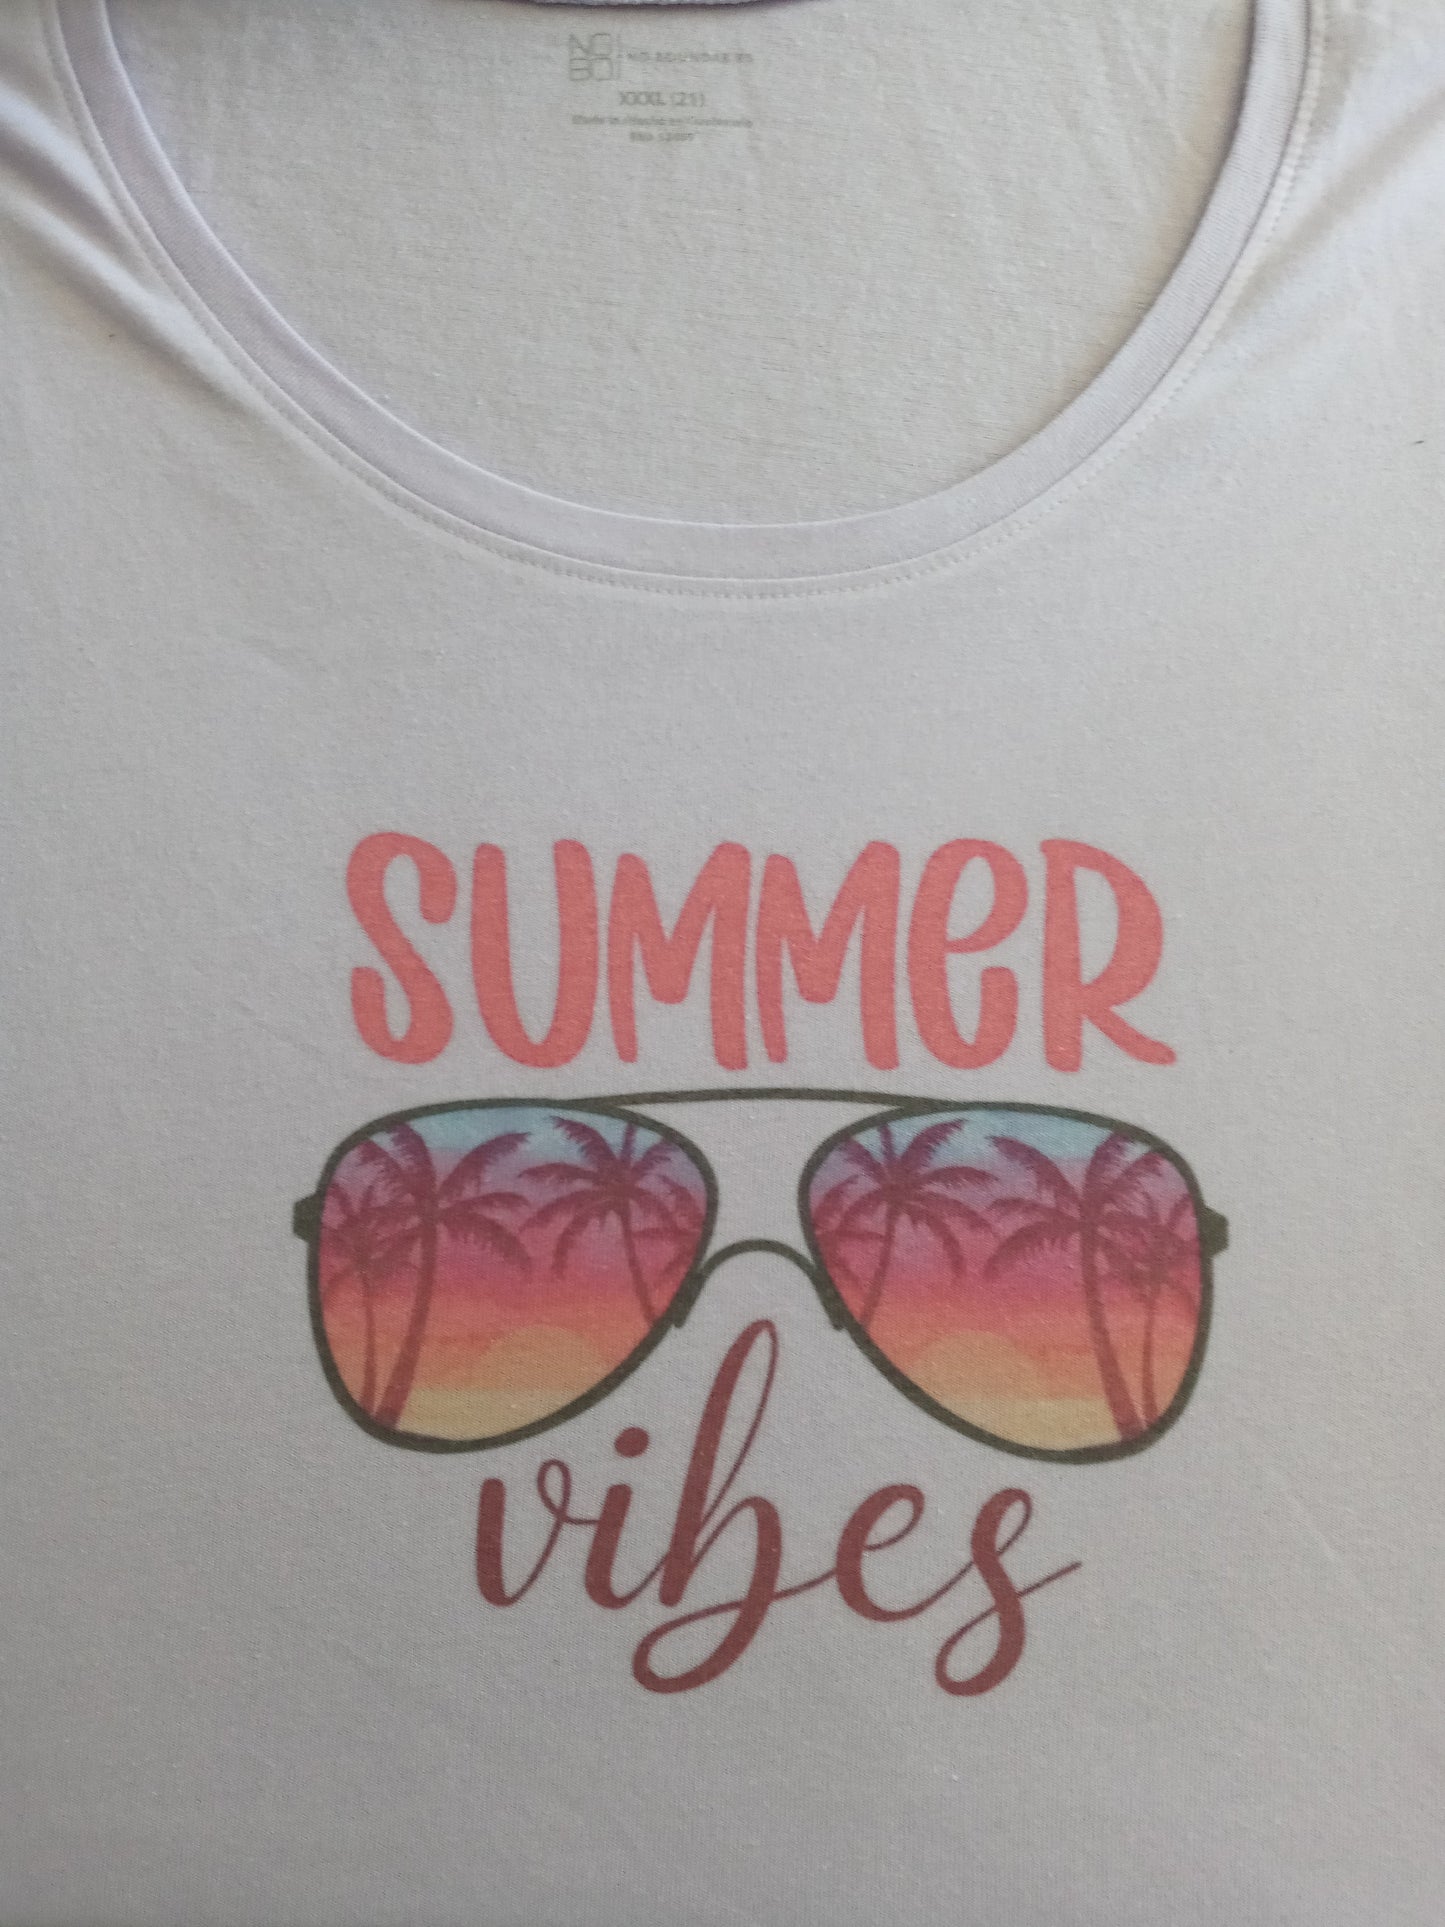 Summer vibes with sunglasses